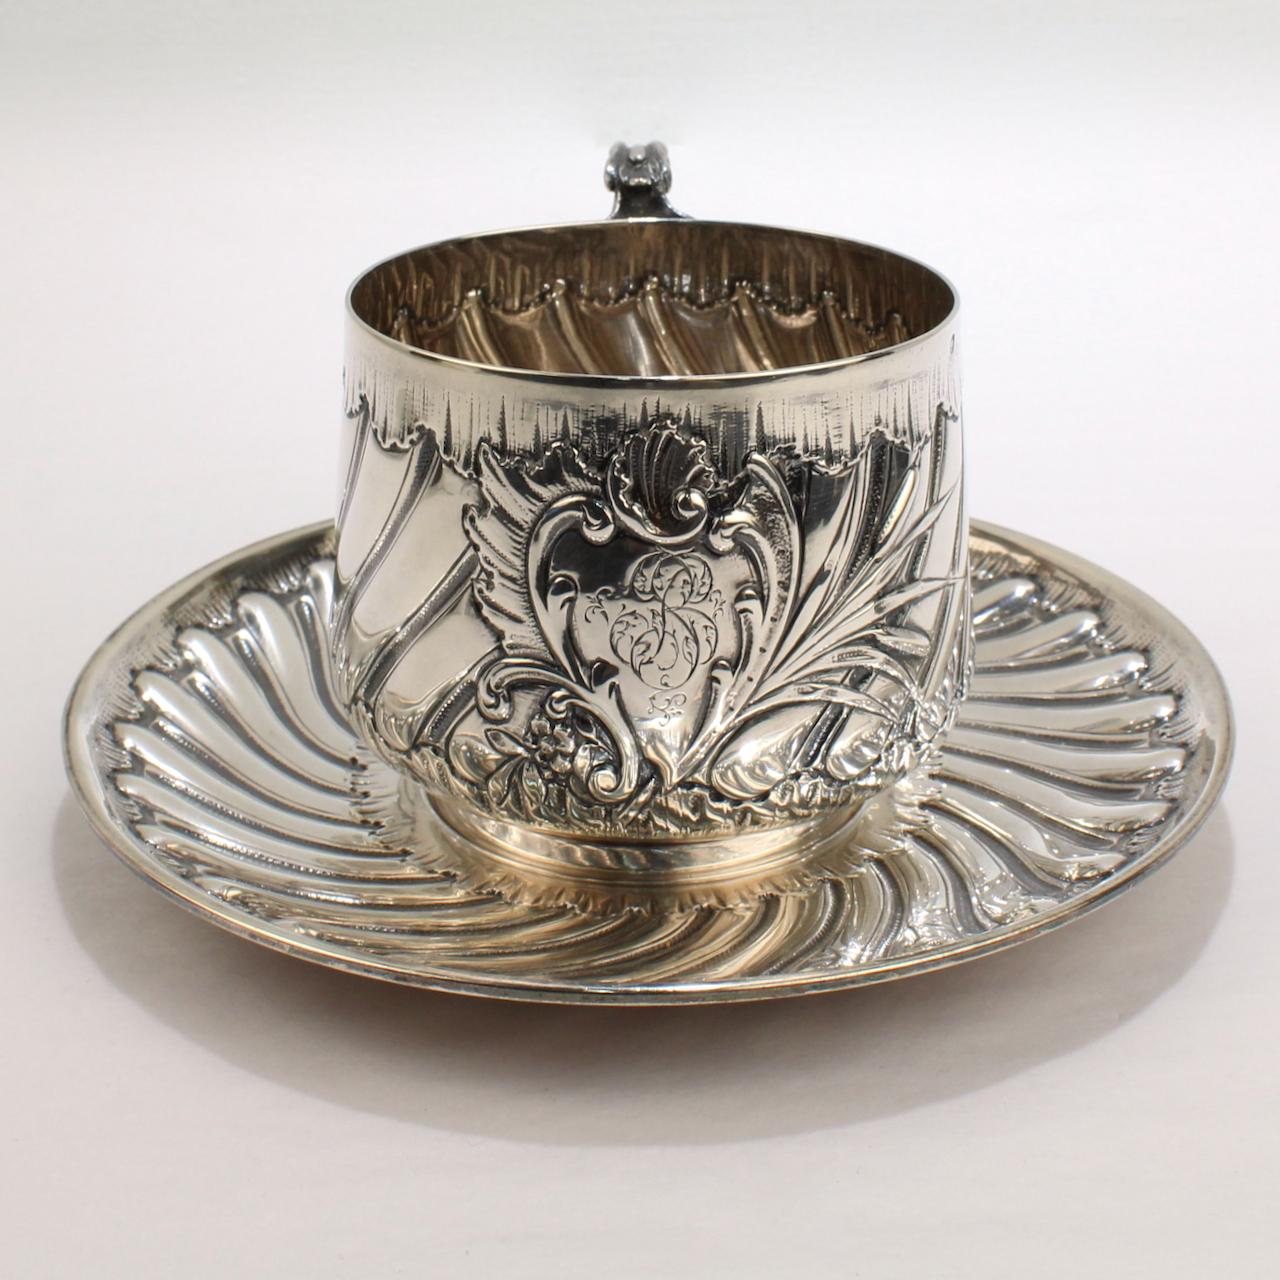 A very fine French sterling silver tea or coffee cup and saucer.

By the noted 19th century Parisian silver and goldsmith - Pierre Gavard.

With hand chased, swirled rib decoration throughout.

A central cartouche has an engraved monogram and is